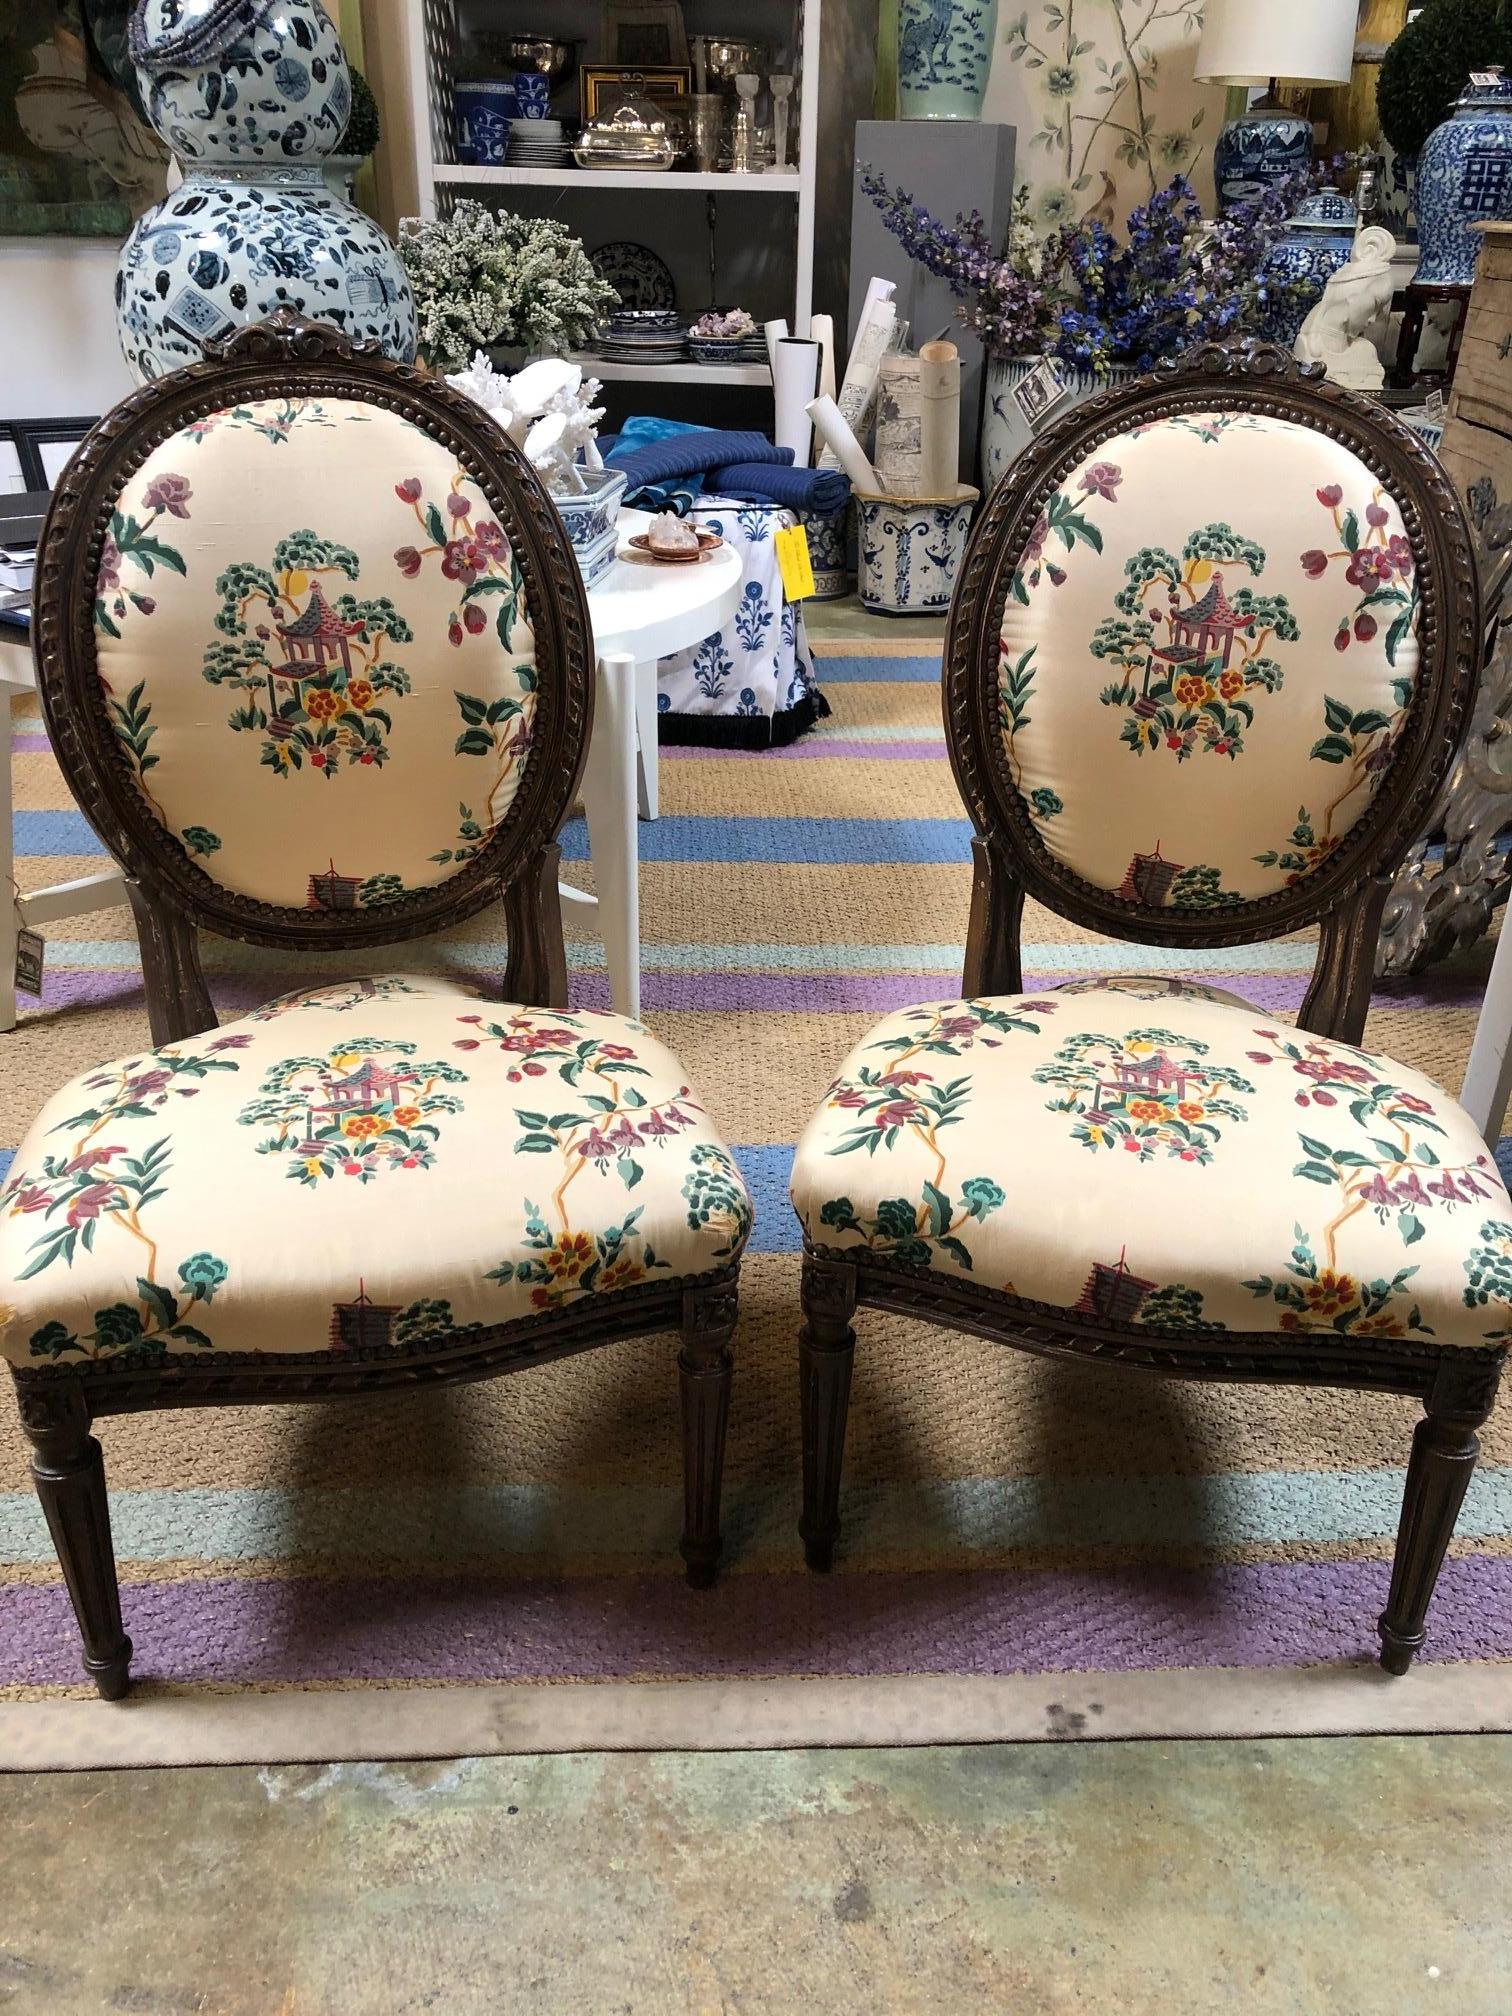 Beautiful petite French chairs. Upholstery is worn and could use new upholstery.